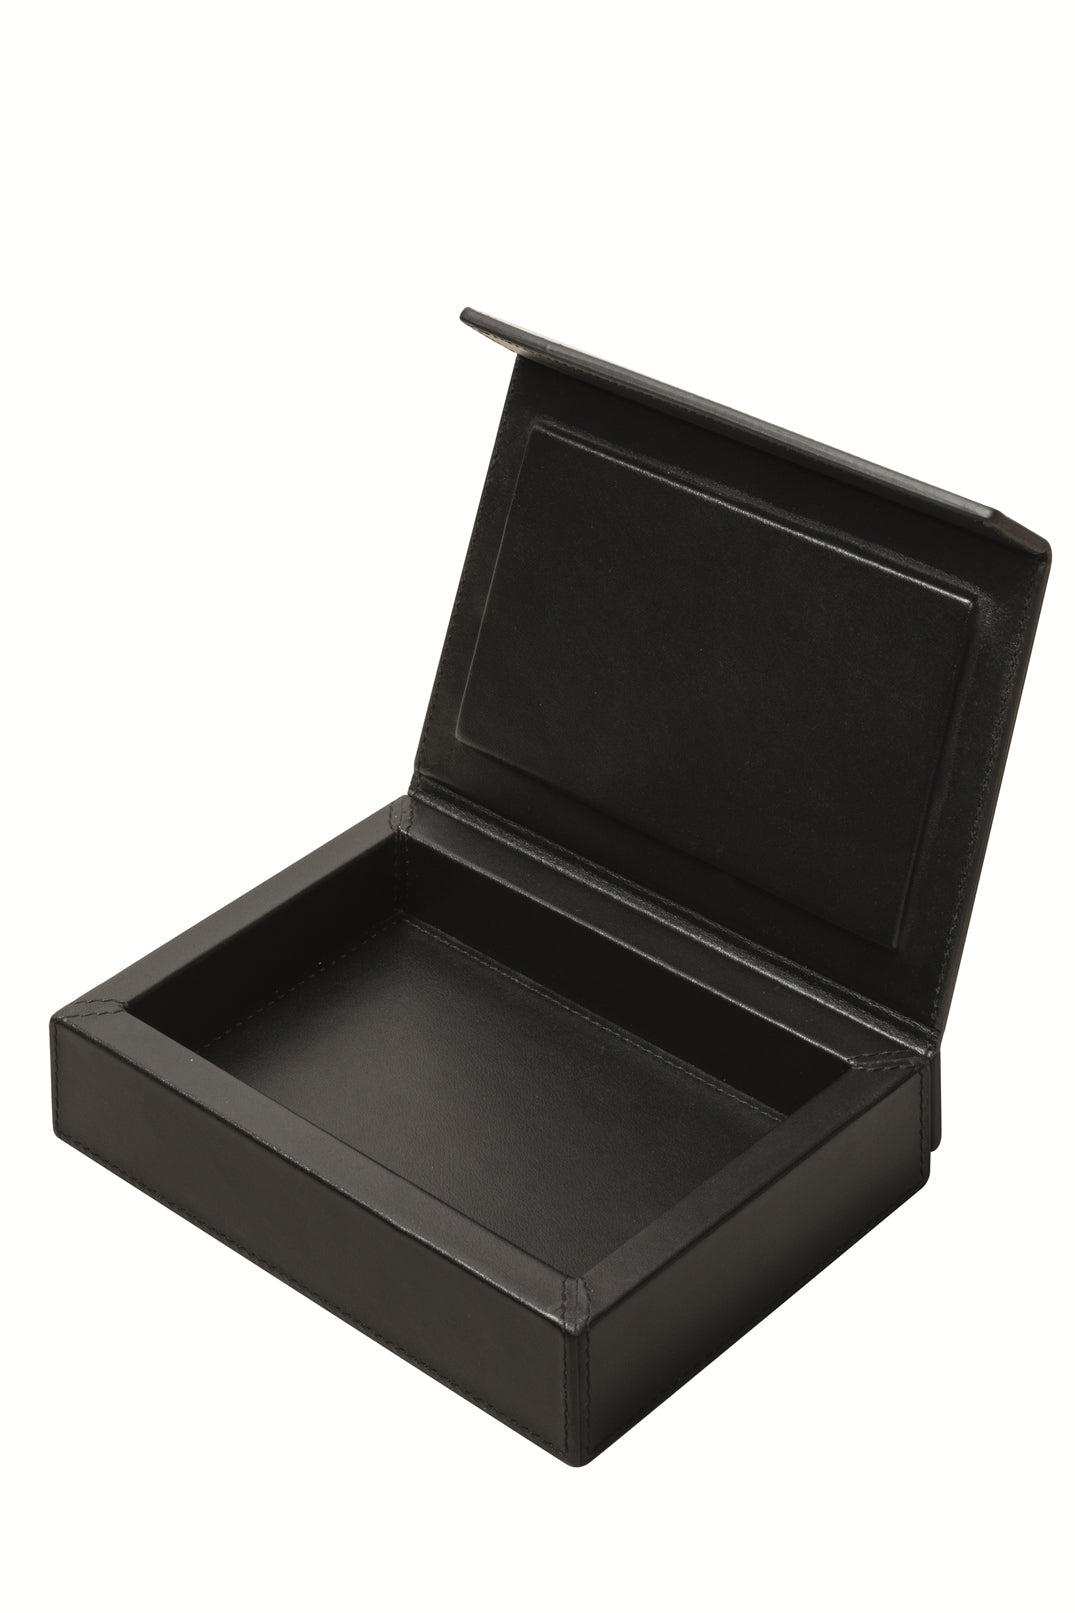 Giobagnara Crosera Trinket Box Rectangular | Leather-Covered Wood Case with Magnetic Closing | Special Decoration Made with Horsehair and Woven Leather | Explore a Range of Luxury Home Accessories at 2Jour Concierge, #1 luxury high-end gift & lifestyle shop